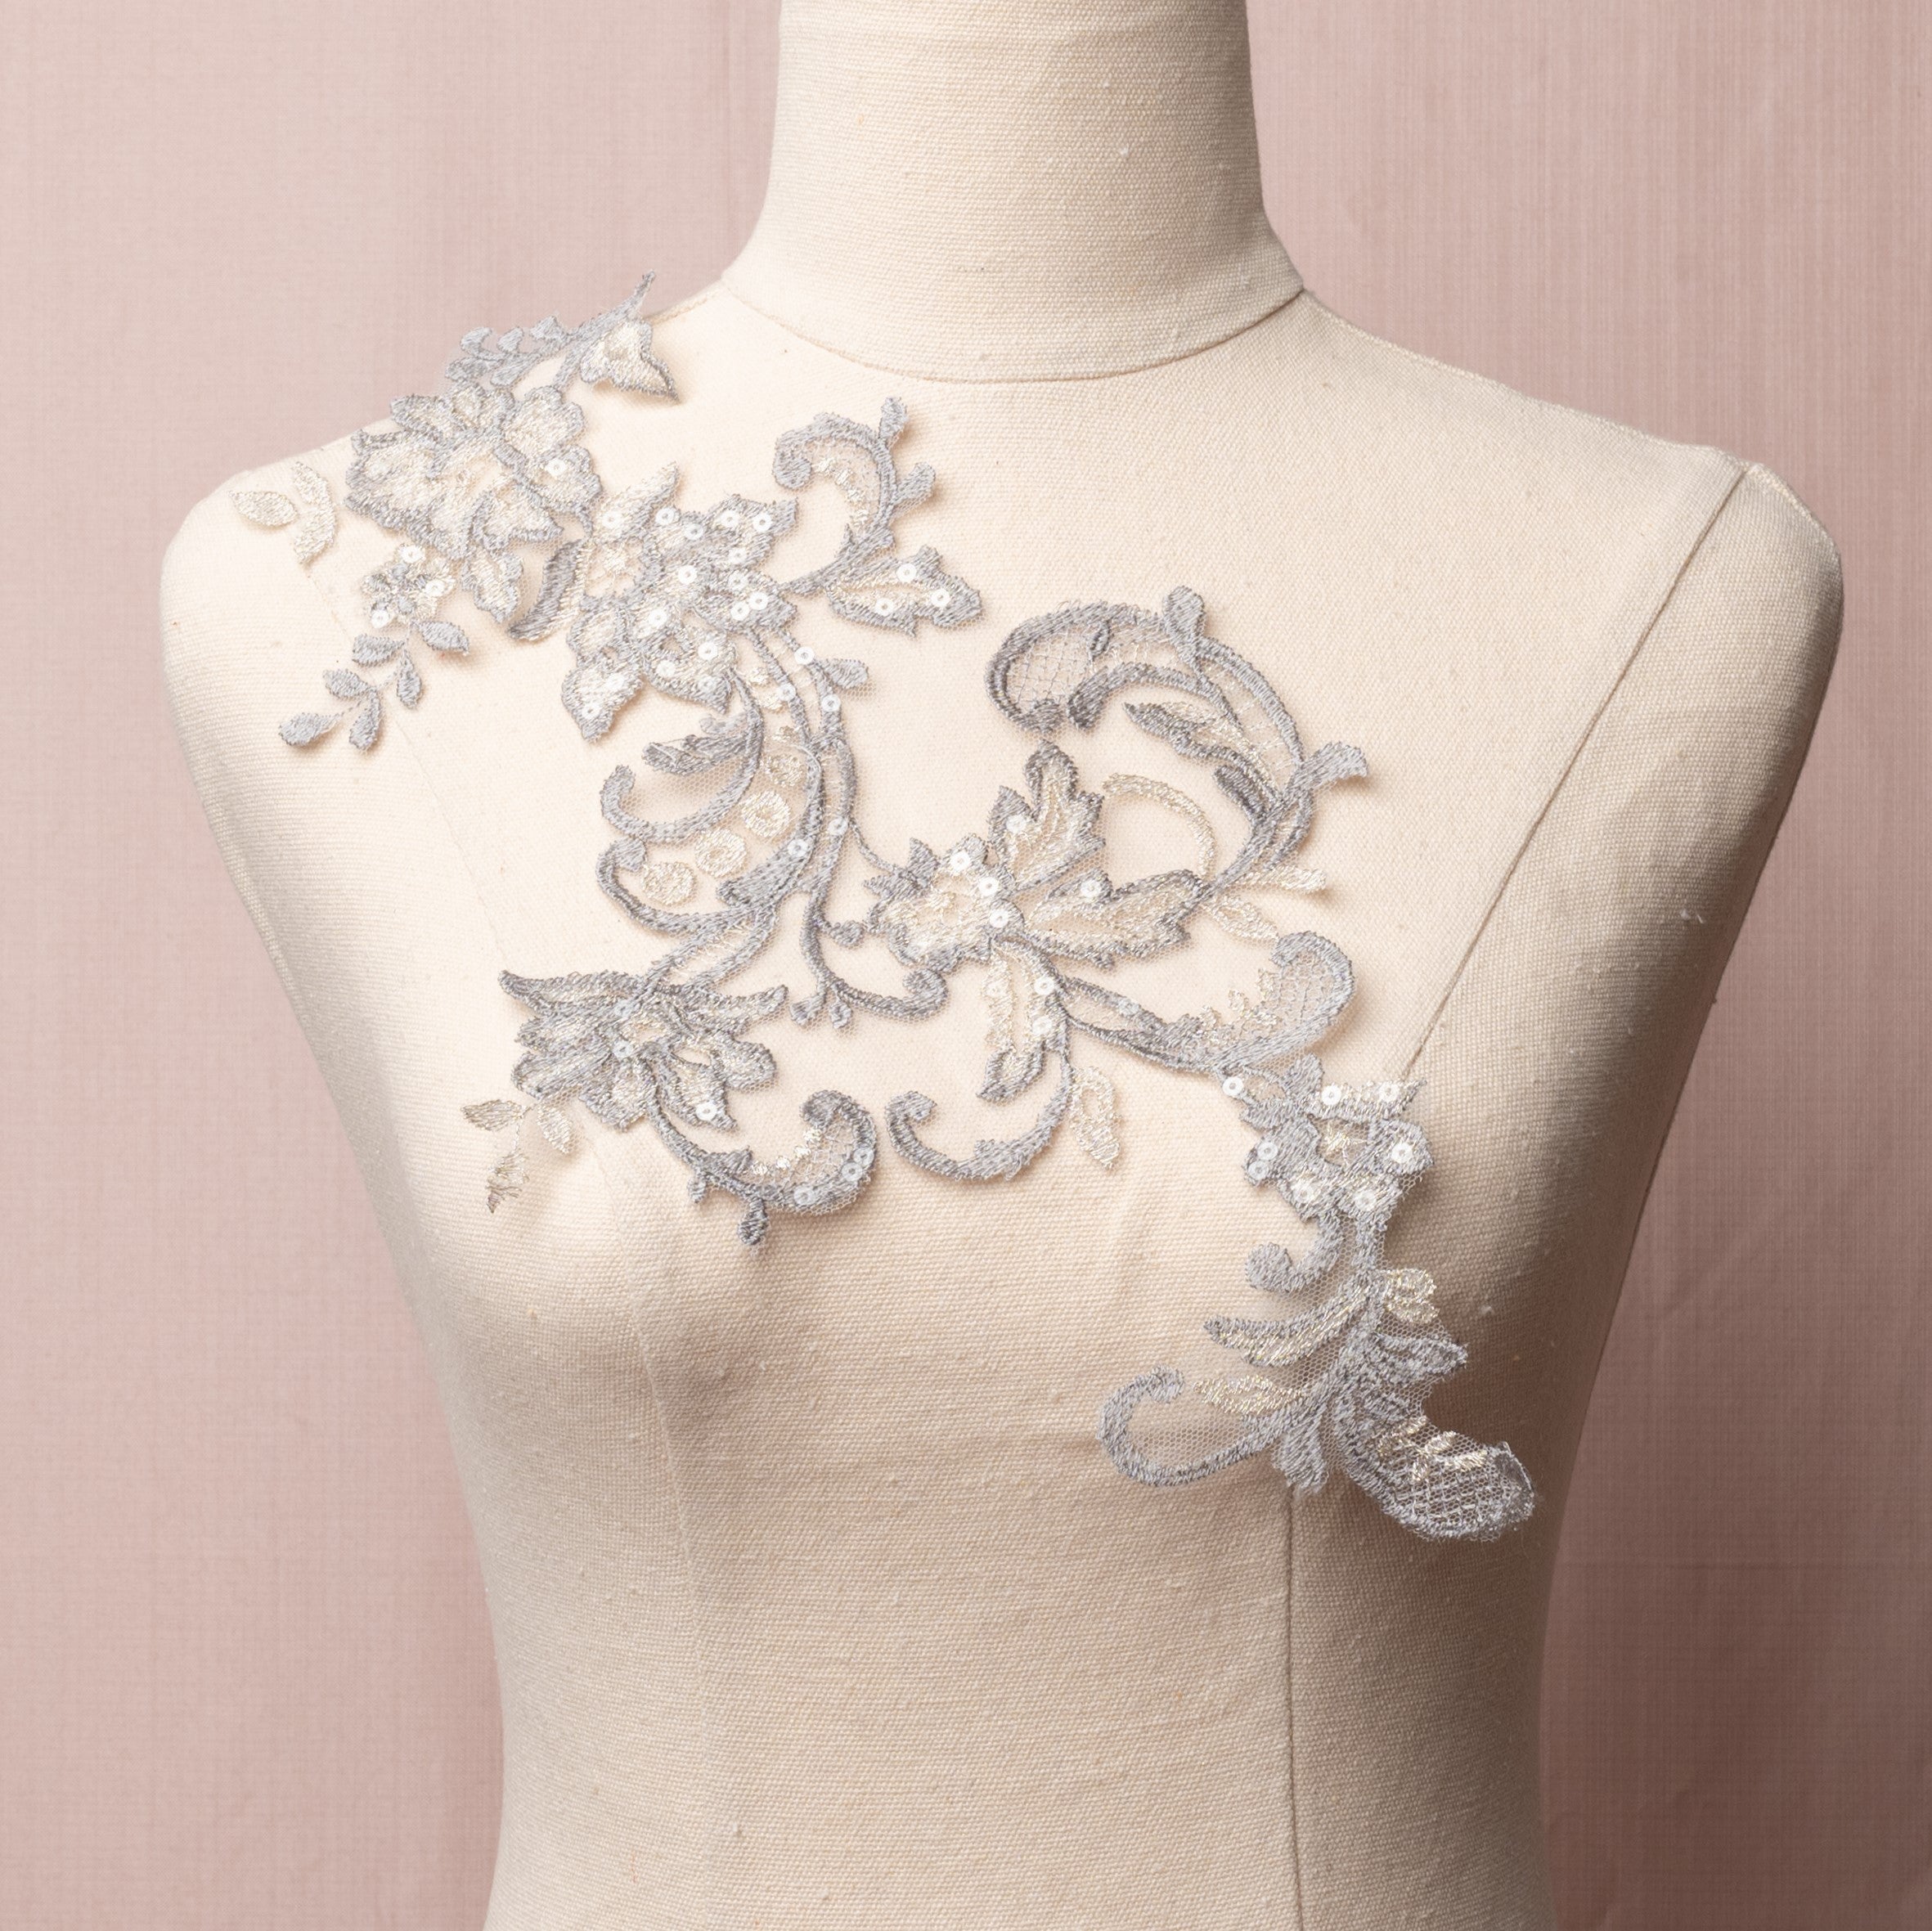 A single delicate grey floral applique highlighted with silver thread on the leaves and flower petals.  The applique is embroidered onto a very fine net and sprinkled with clear sequins.   The applique is displayed on a mannequin.